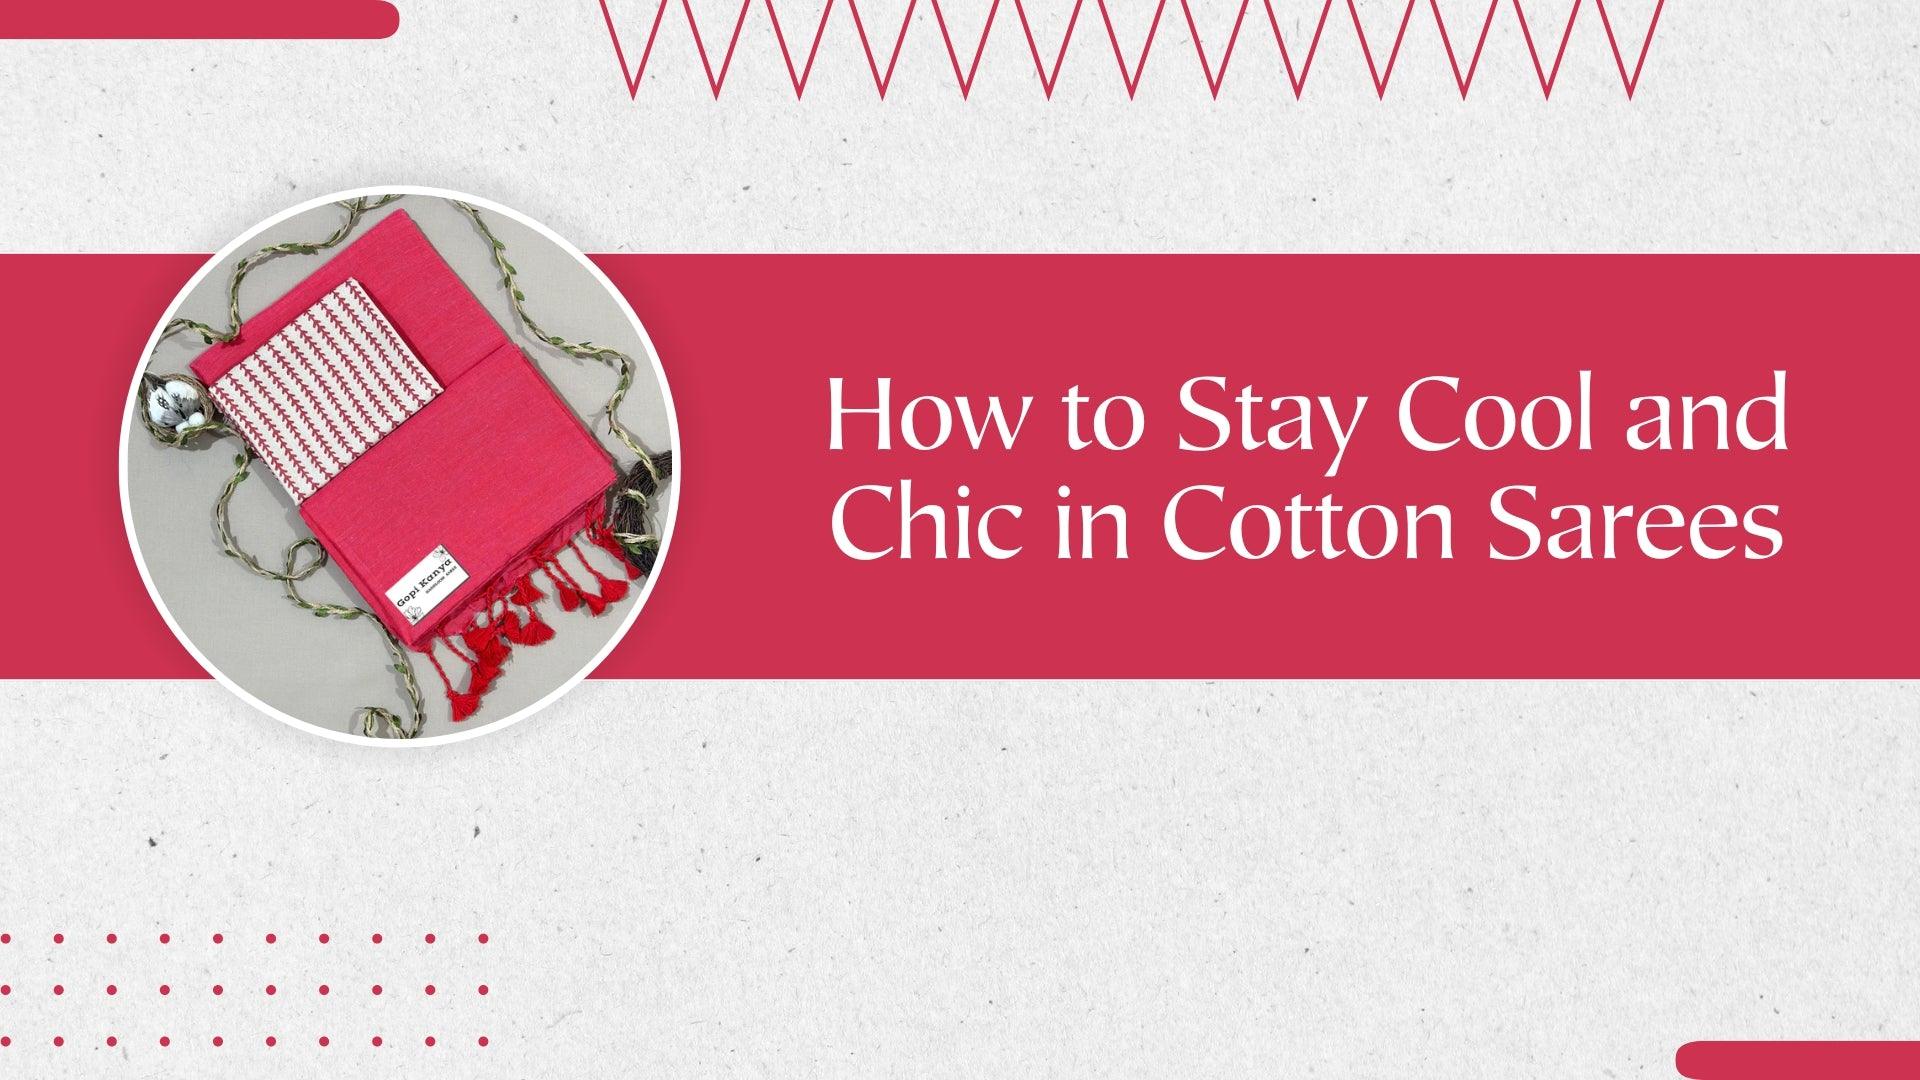 How to Stay Cool and Chic in Cotton Sarees